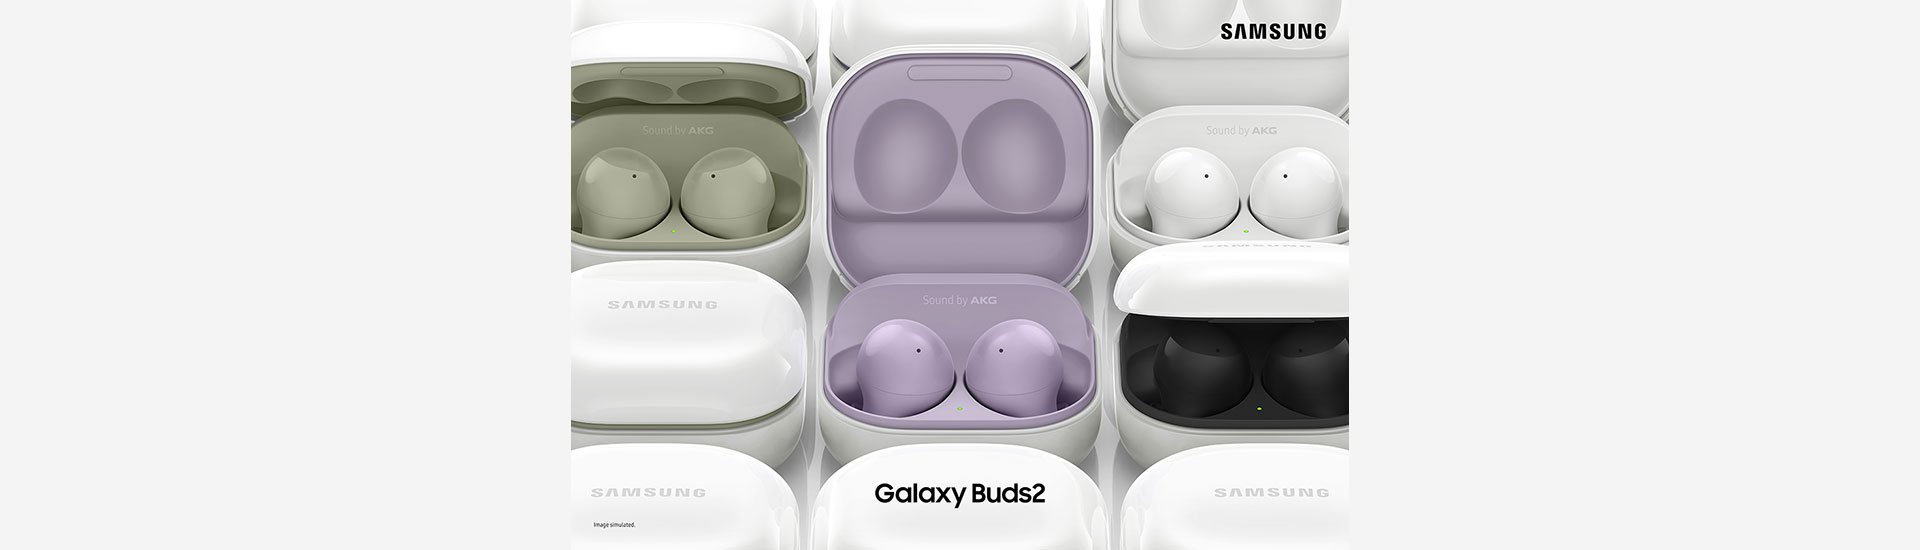 Samsung Galaxy Buds2 enjoy $300 Discount Offer or add-on $33/mth up. Suggested Retail Price $1,298.